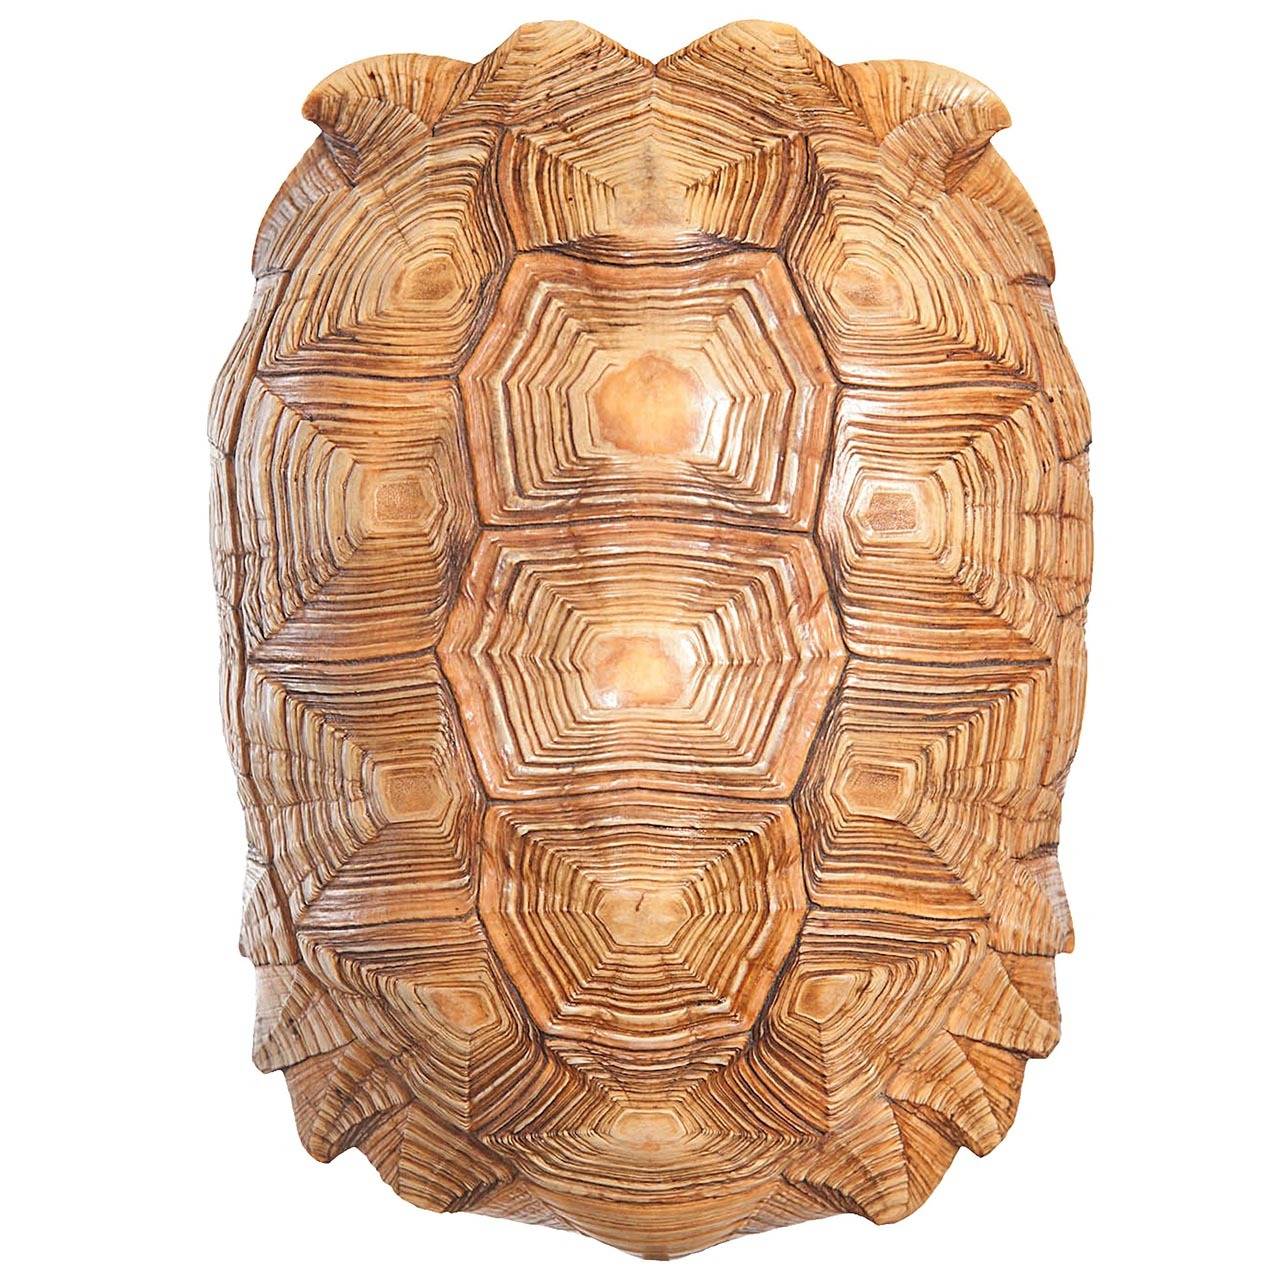 Large Turtle Shell, African Spurred Tortoise For Sale at 1stDibs  african  spurred tortoise for sale, top of a turtle shell, sulcata tortoise shell